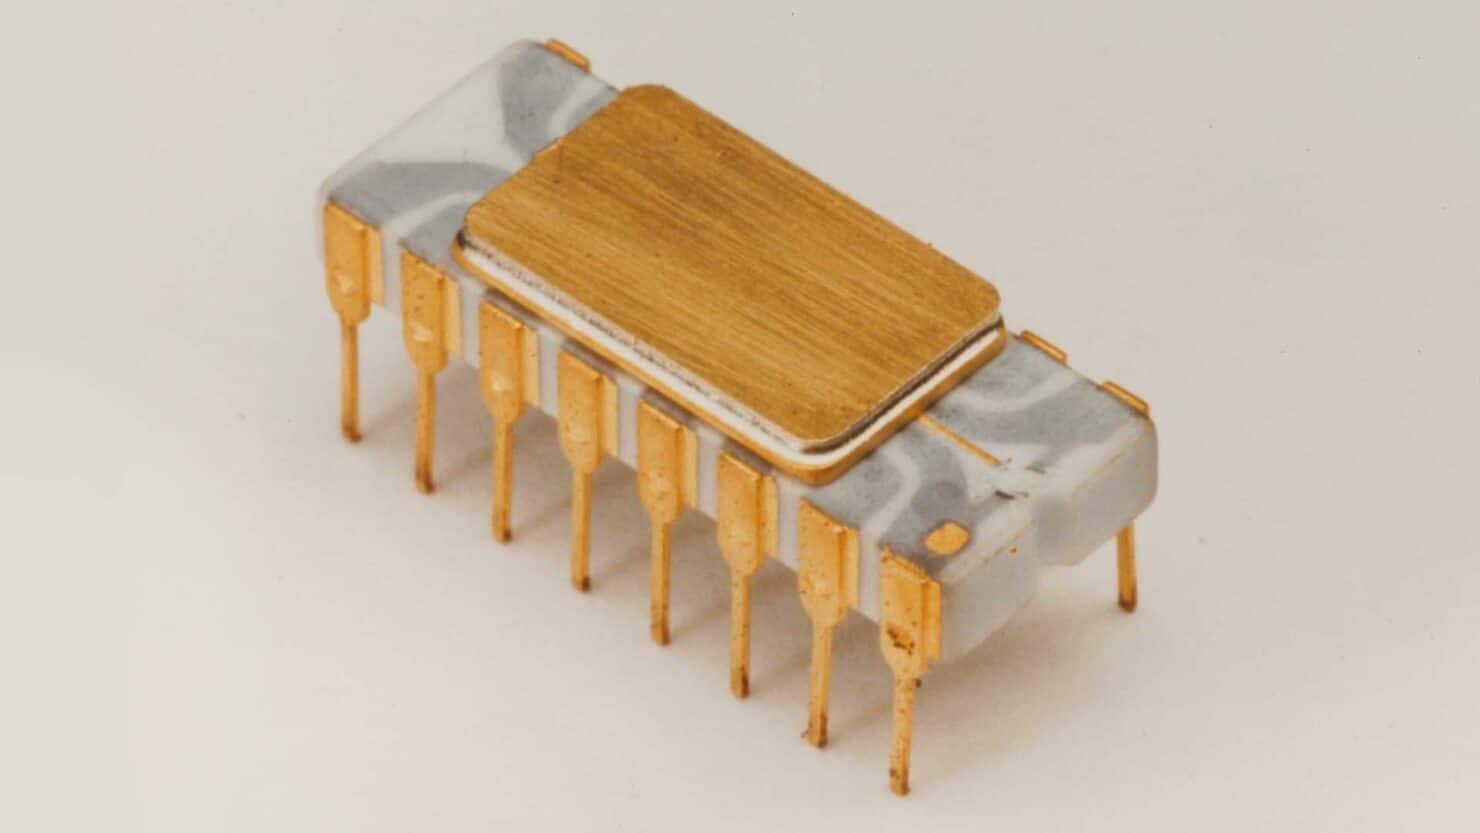 the world's first commercial microprocessor